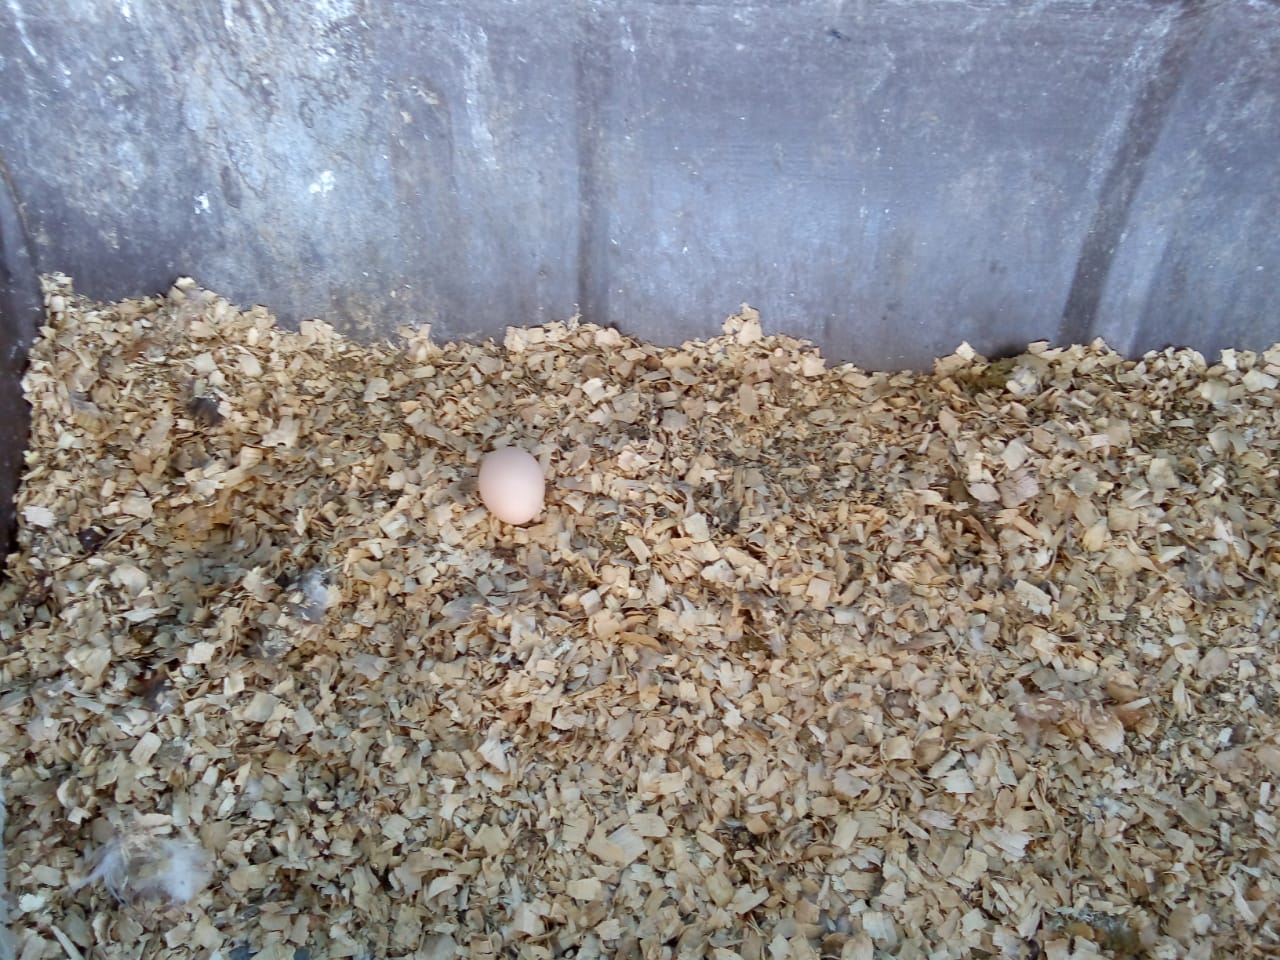 first egg that was laid by a chicken